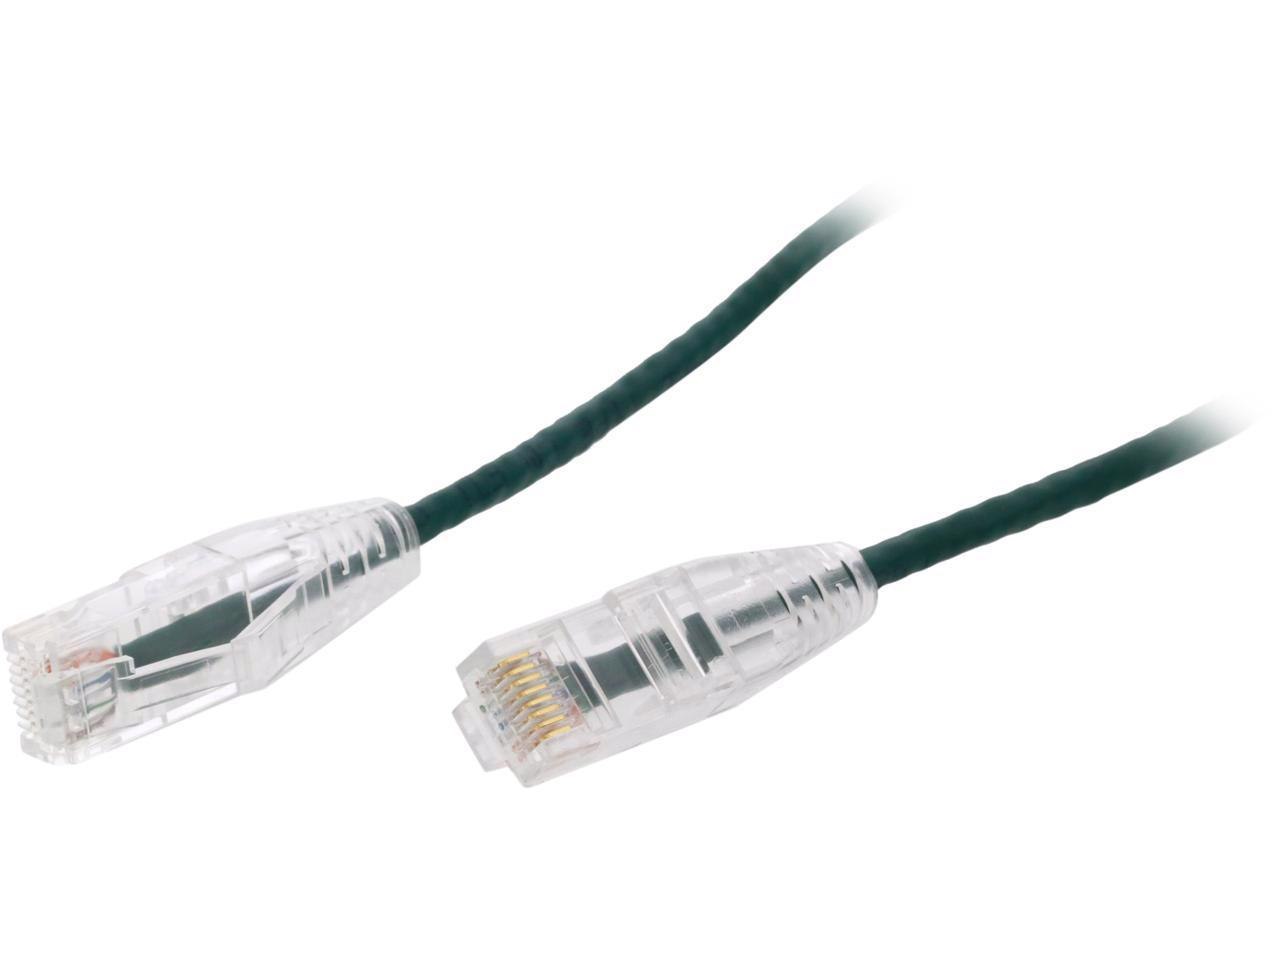 Nippon Labs 28 Awg Snagless Ultra Slim Cat6 Ethernet Patch Cable - Network Internet Cord - RJ45